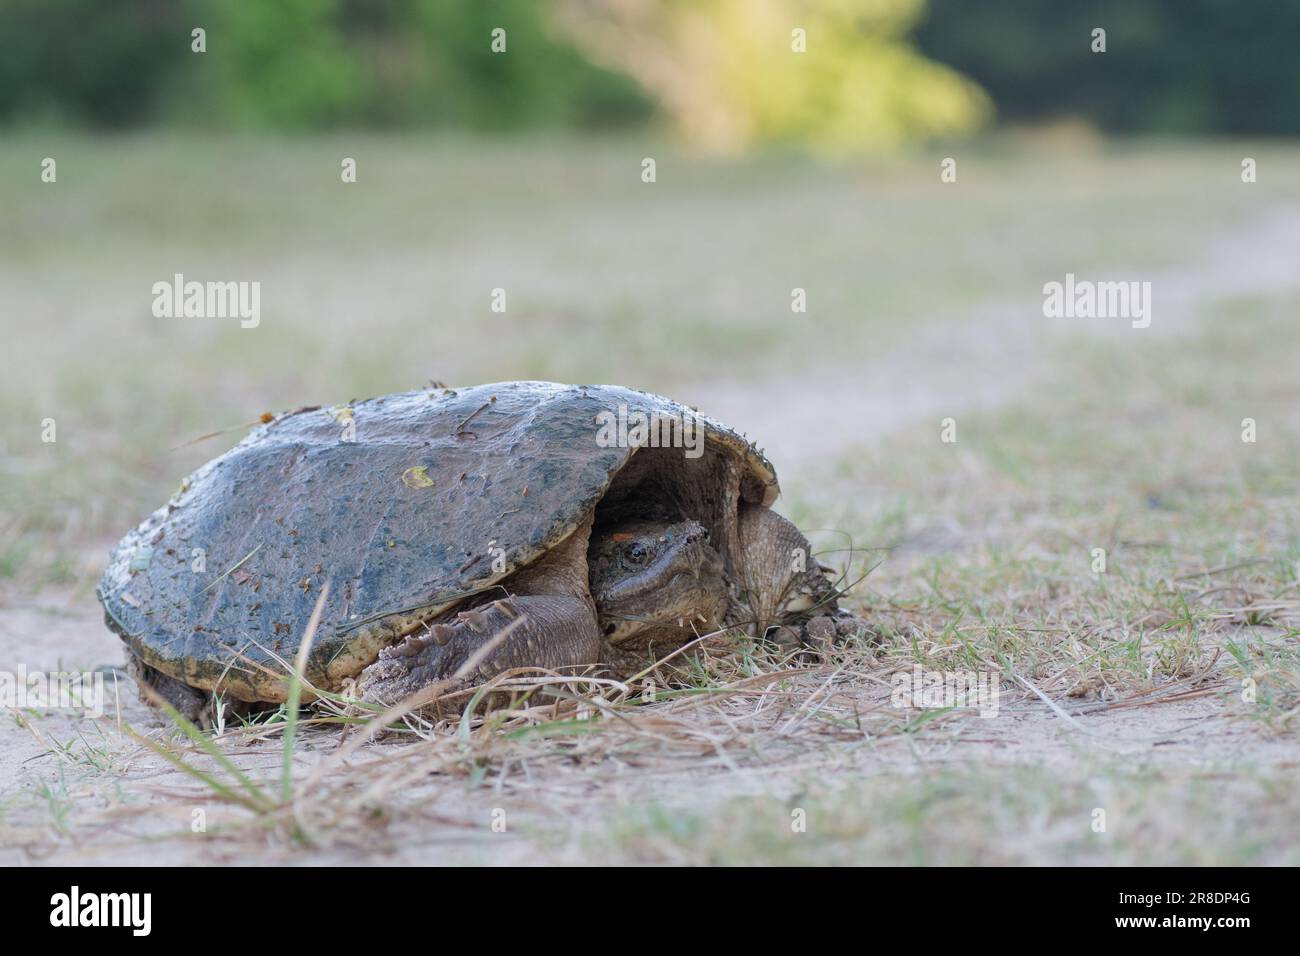 A common snapping turtle, Chelydra serpentina, resting on a footpath in East Texas. Stock Photo